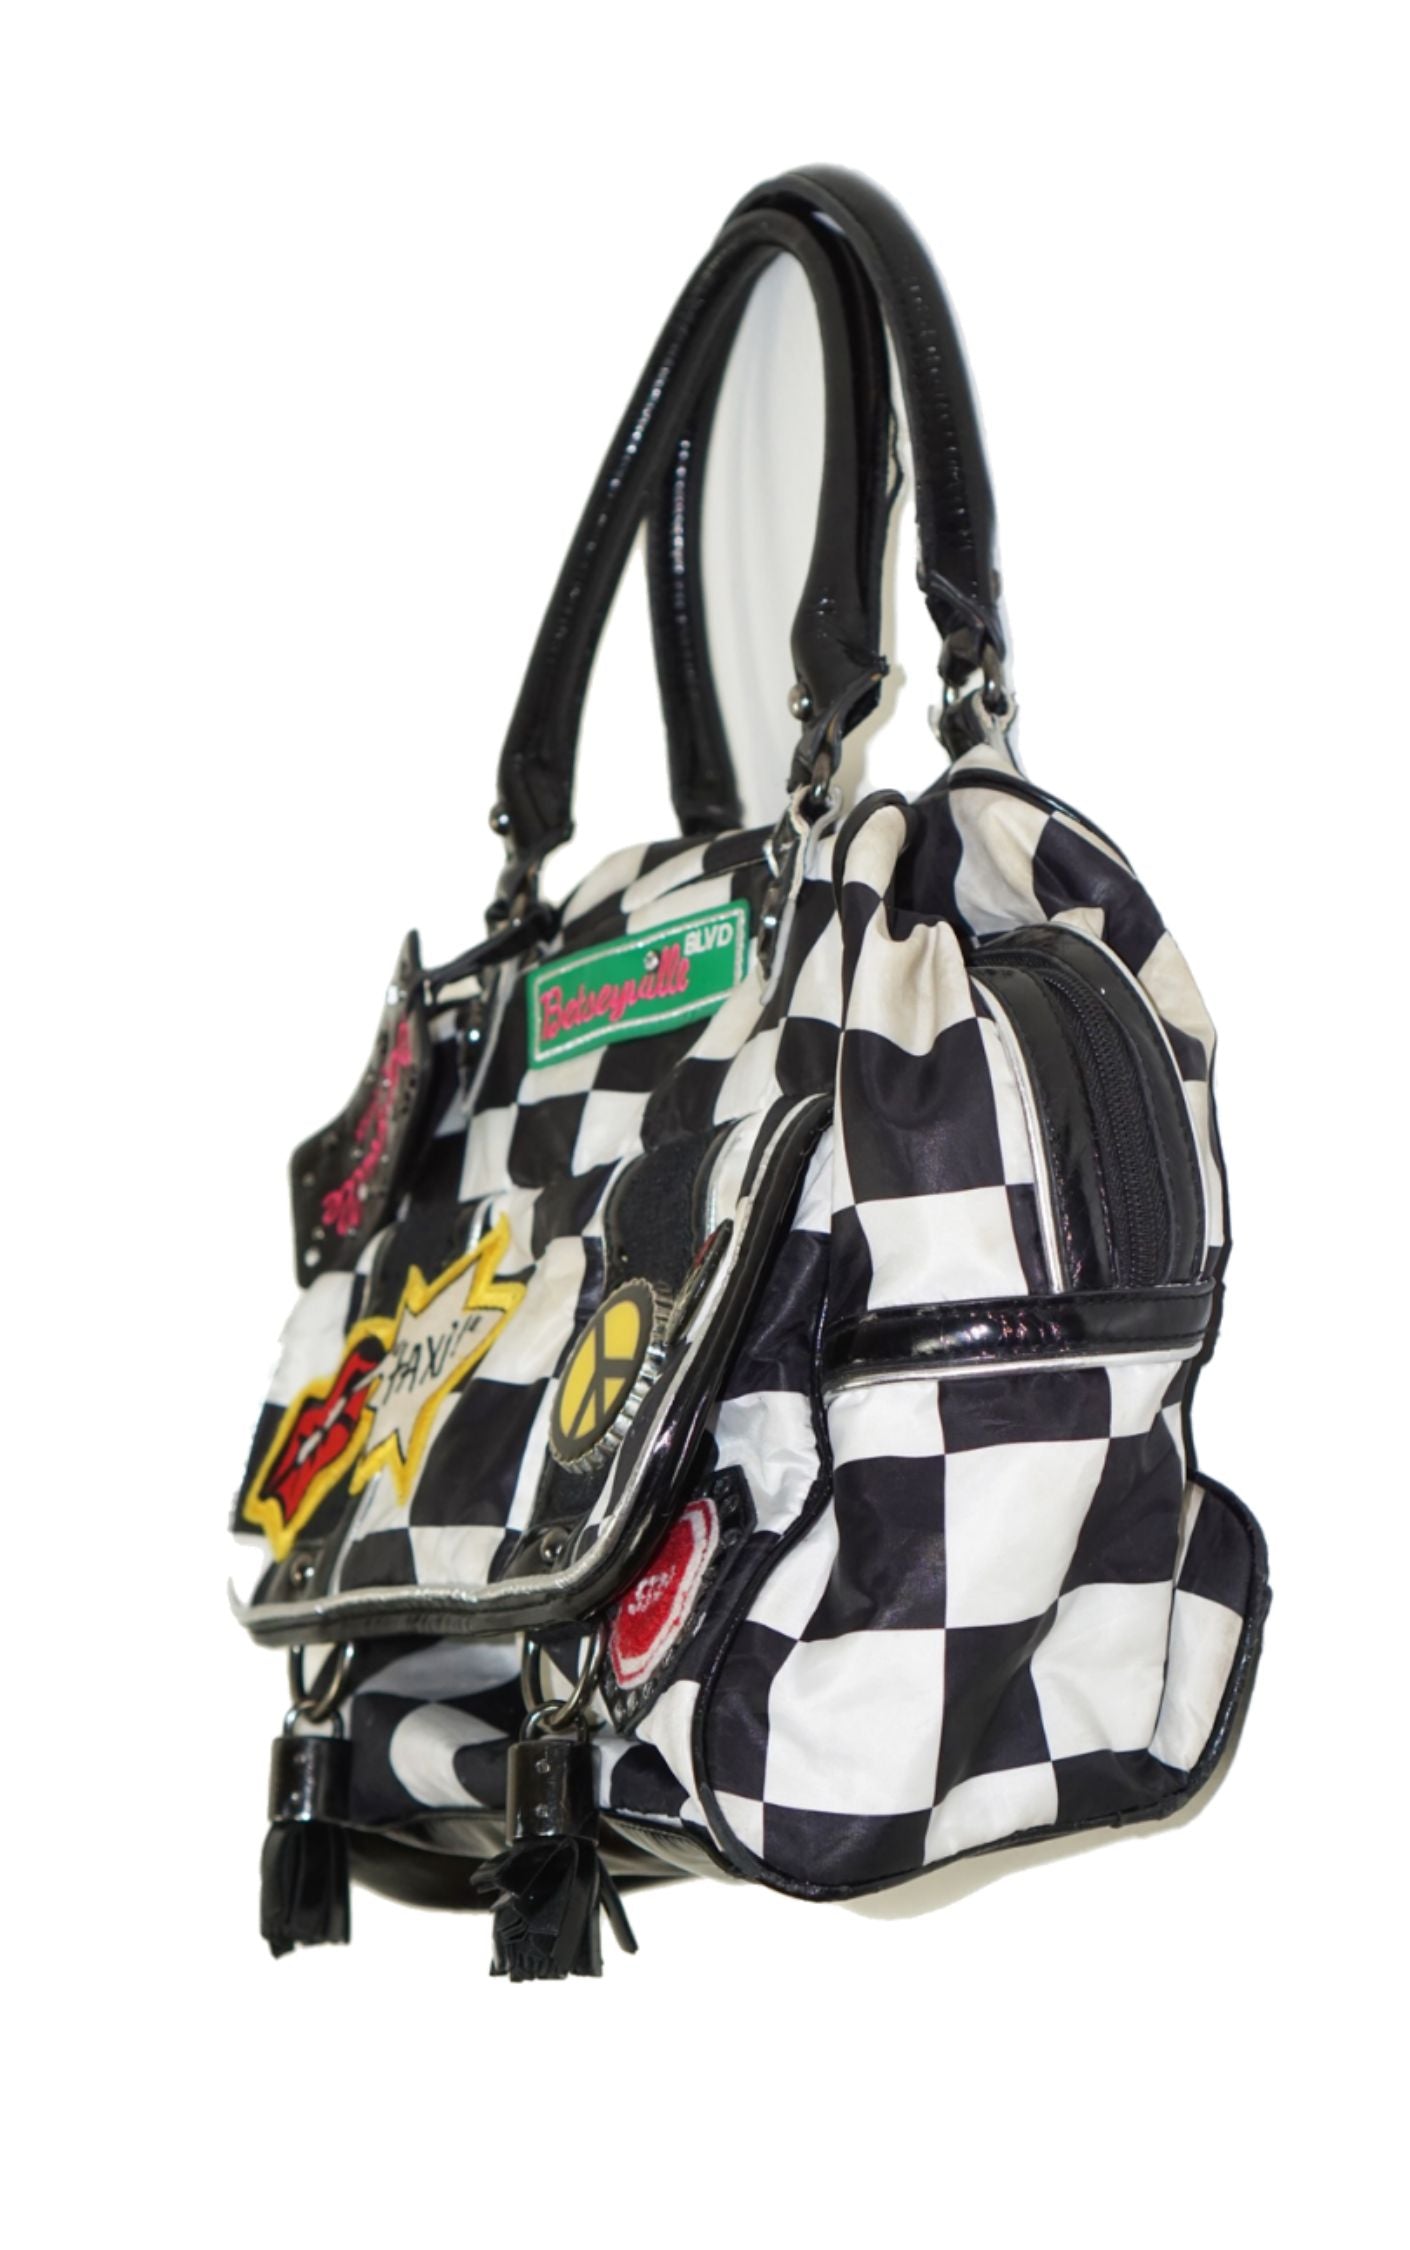 BETSEY JOHNSON NY Checkered Patches Bag resellum